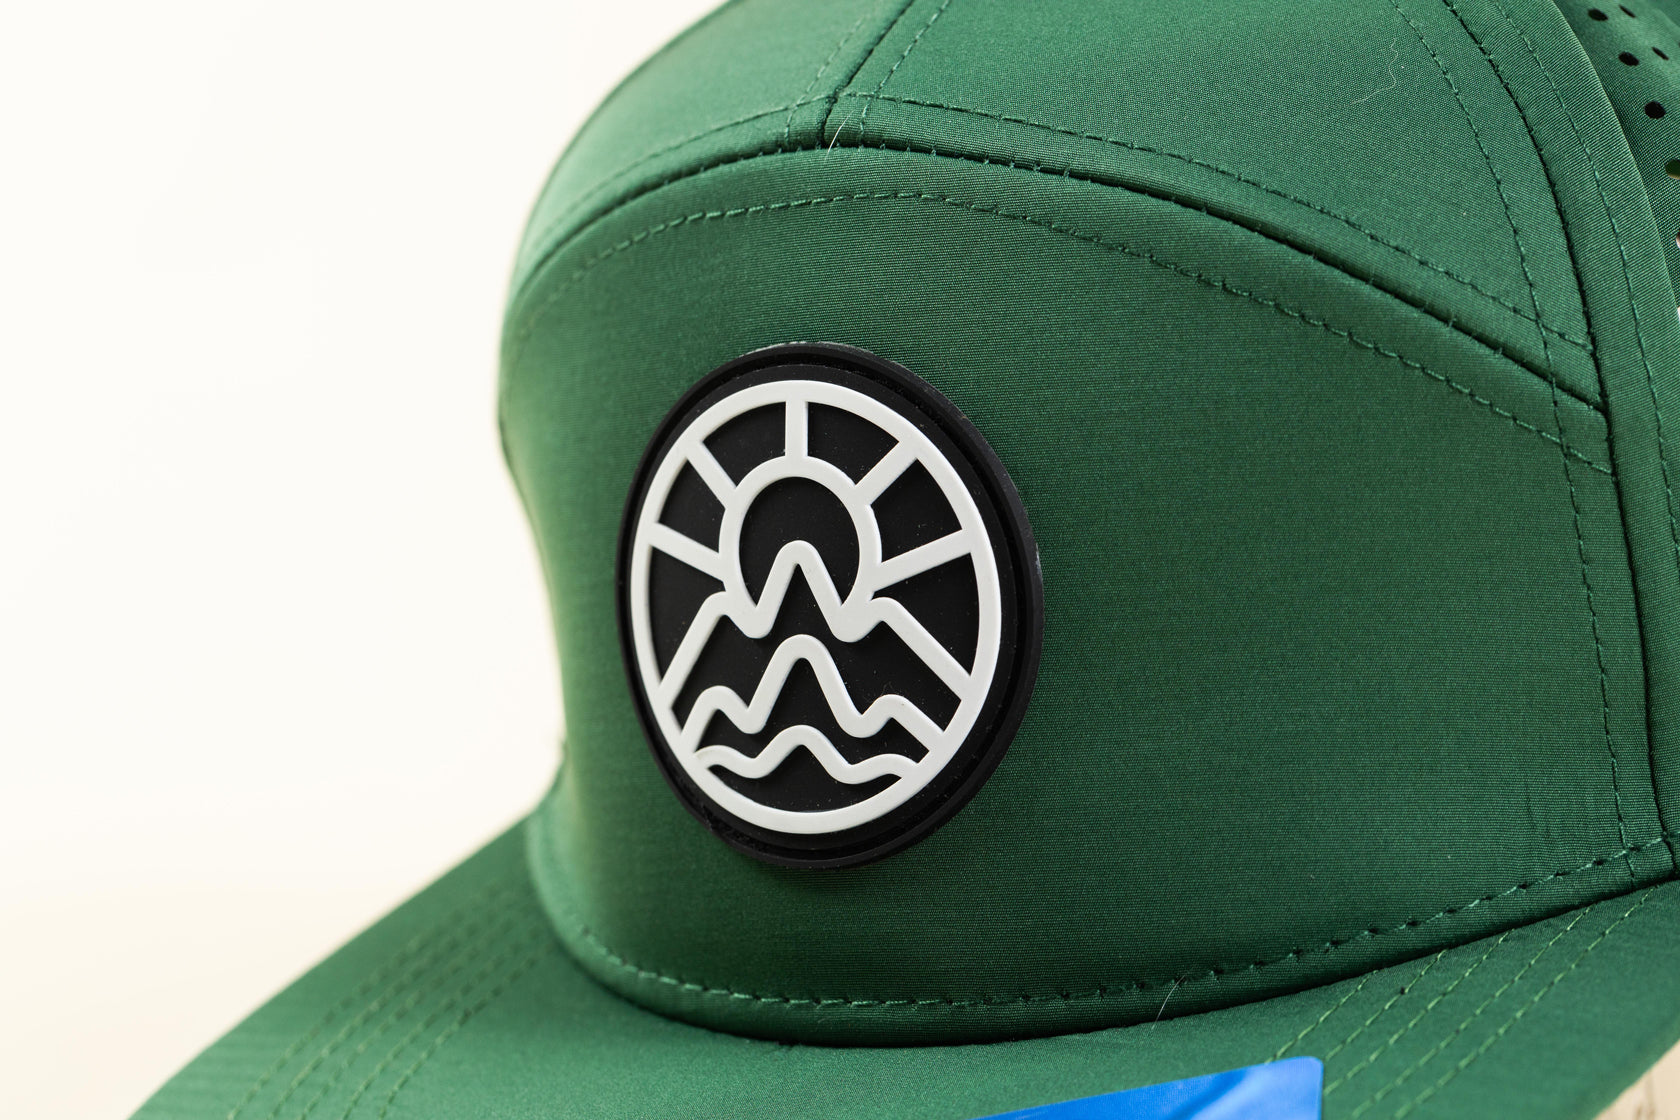 Black and White McClumsy Logo on the front of their Green 7 Panel Laser Cut Back Trucker Hat. 